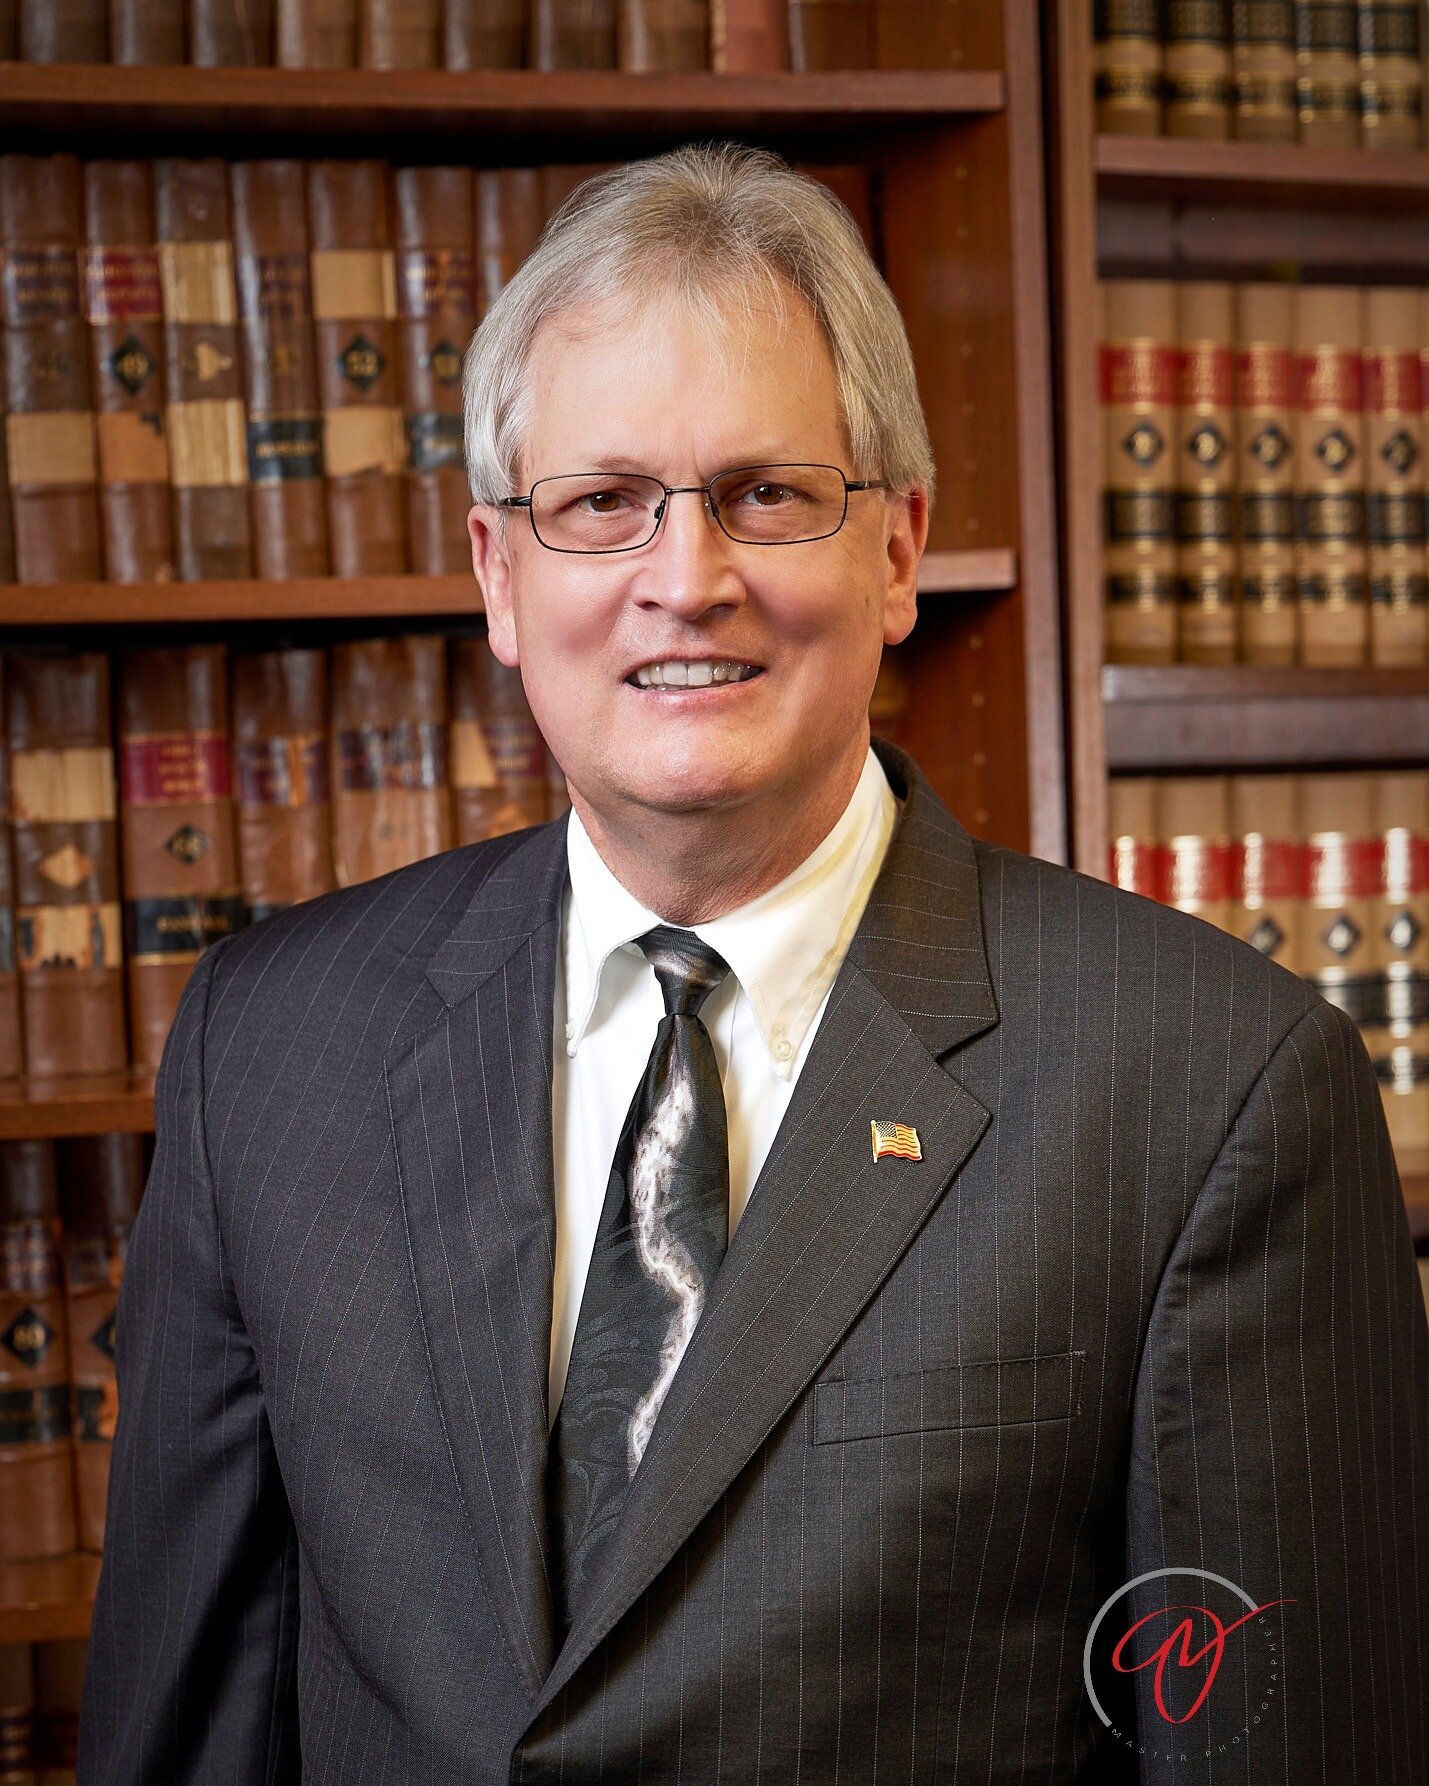 St. Clairsville Attorney Michael &ldquo;Mike&rdquo; McCormick will seek the appointment to Judge Frank A. Fregiato&rsquo;s judicial seat after it becomes vacant on June 30th. Mike has used our studio for over a decade for all of his personal and fami